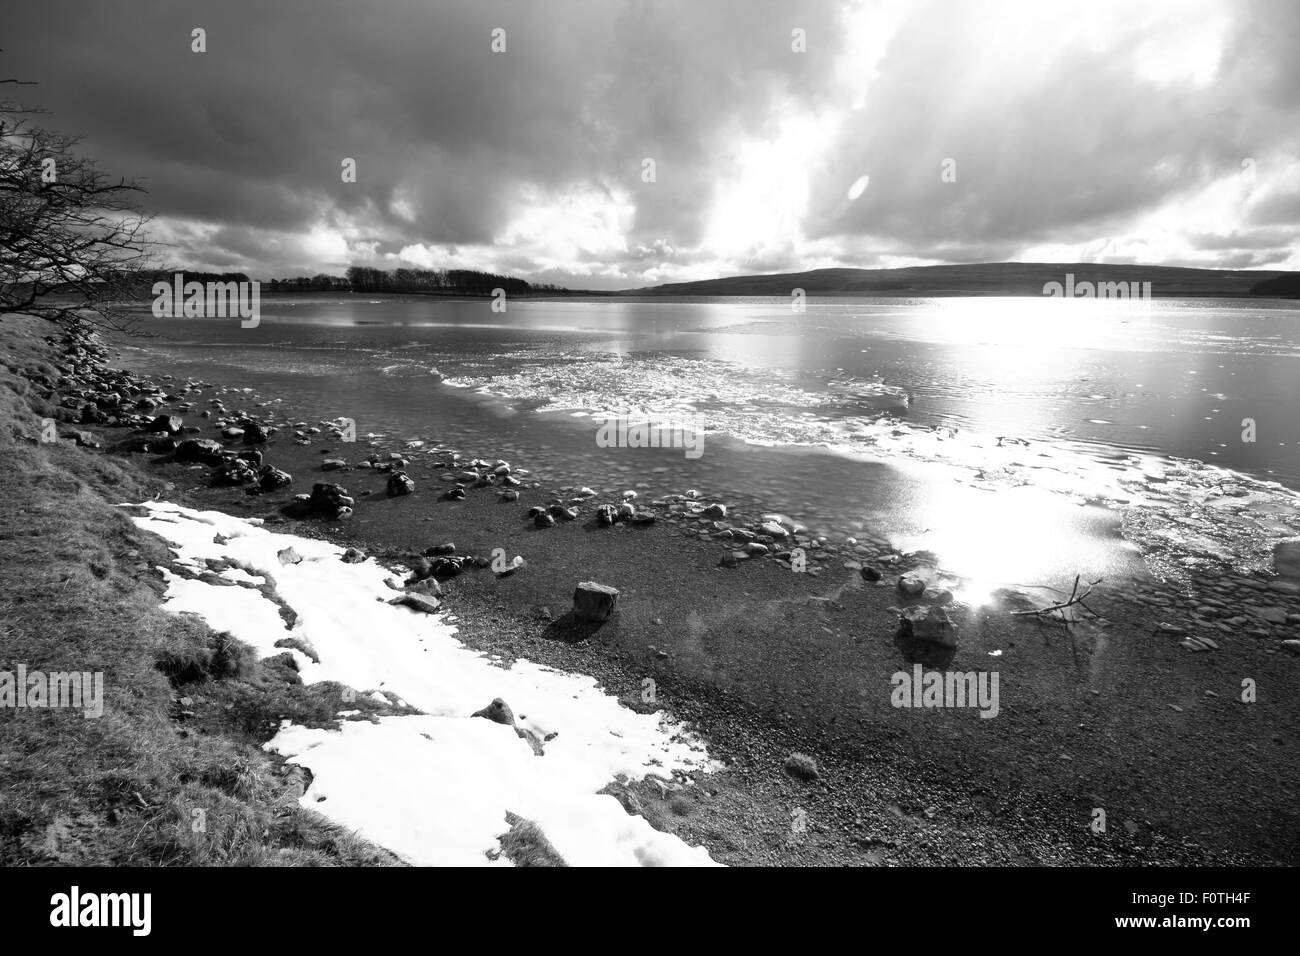 A dramatic sky reflected in the waters of Malham Tarn in North Yorkshire, England, UK, with snow and ice during winter. Stock Photo